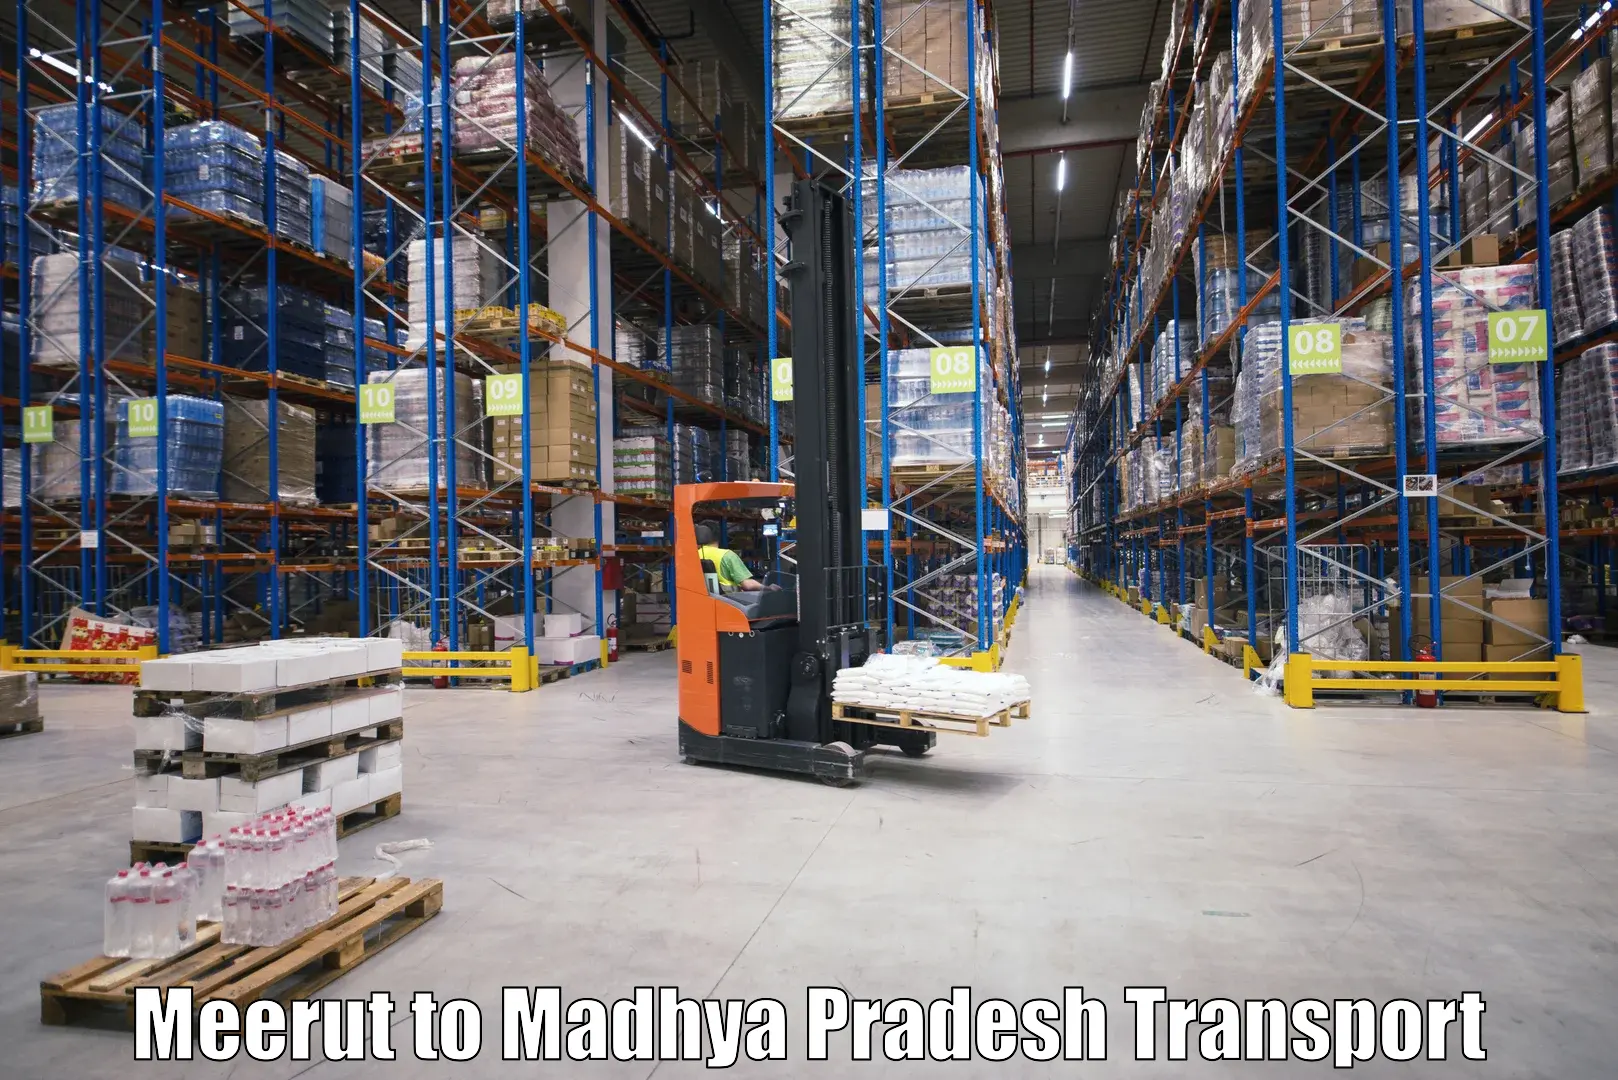 Daily parcel service transport Meerut to Khandwa